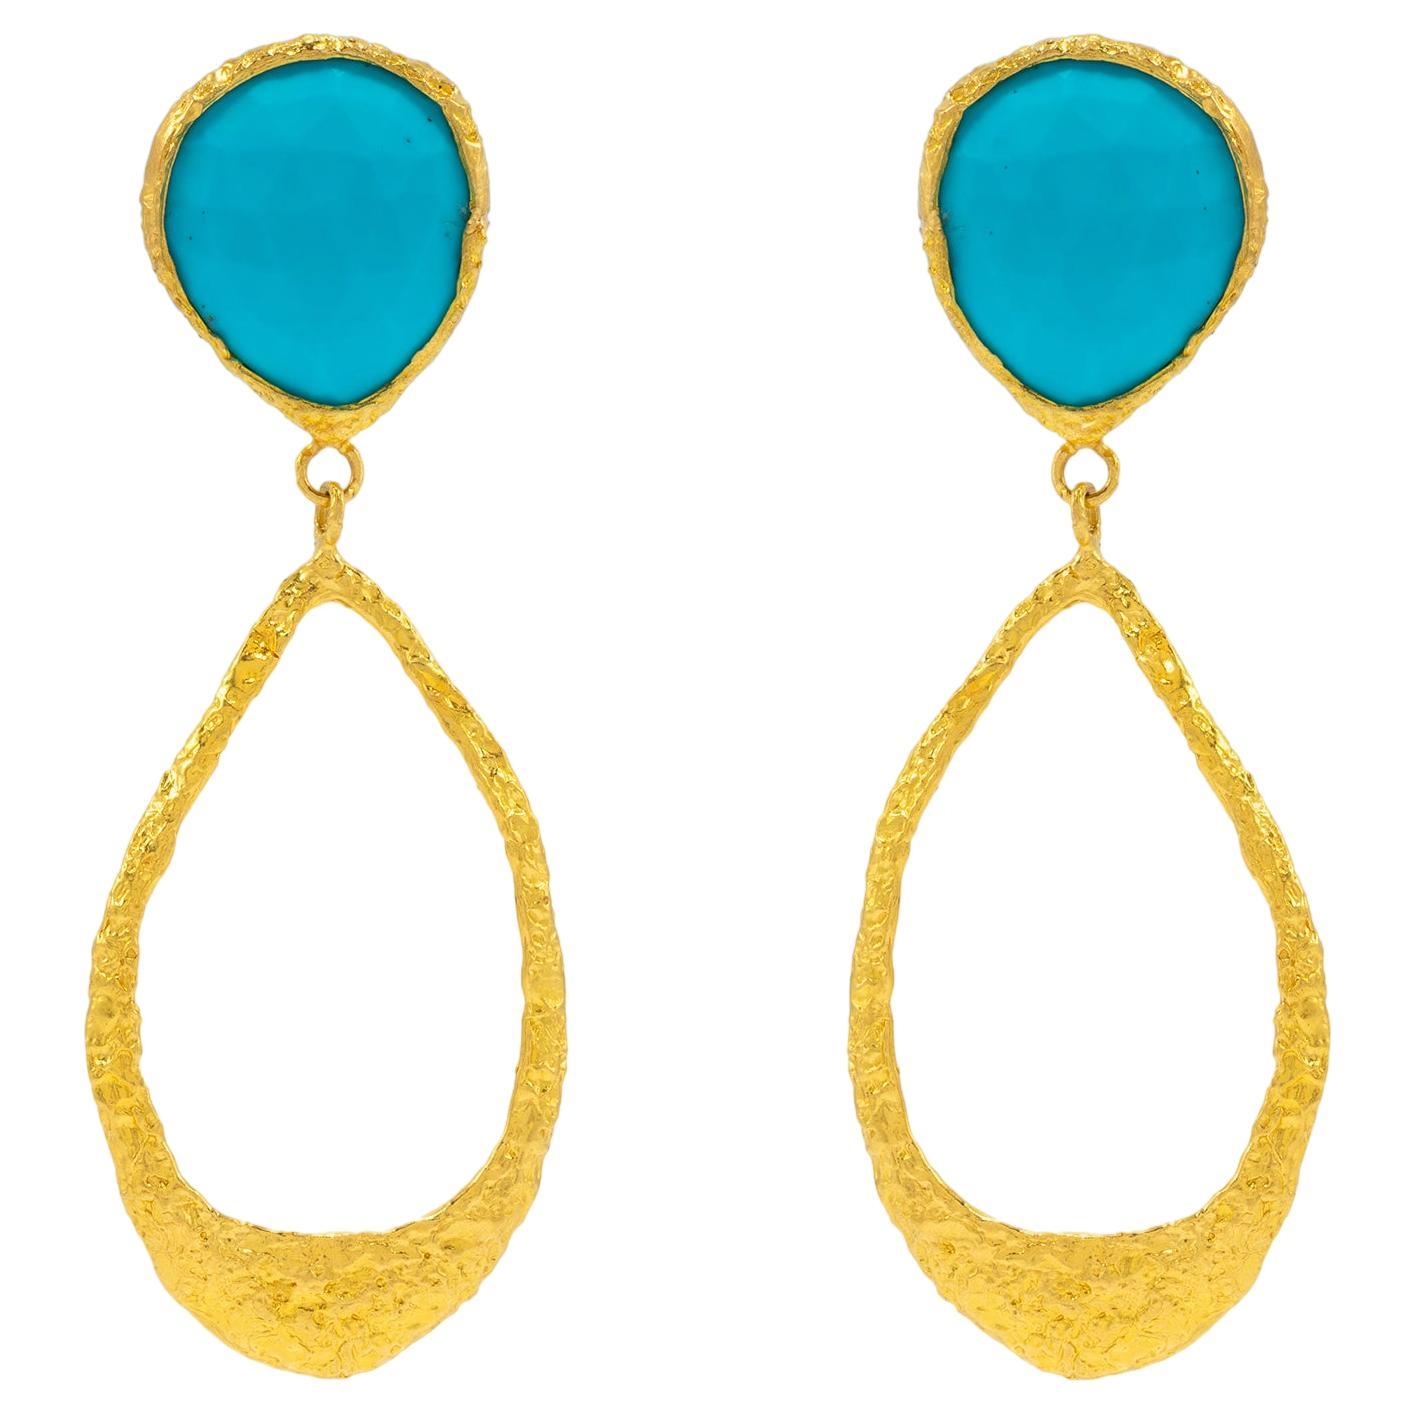 Tagili Signature Teardrop Earrings with Turquoise in 22k Gold For Sale